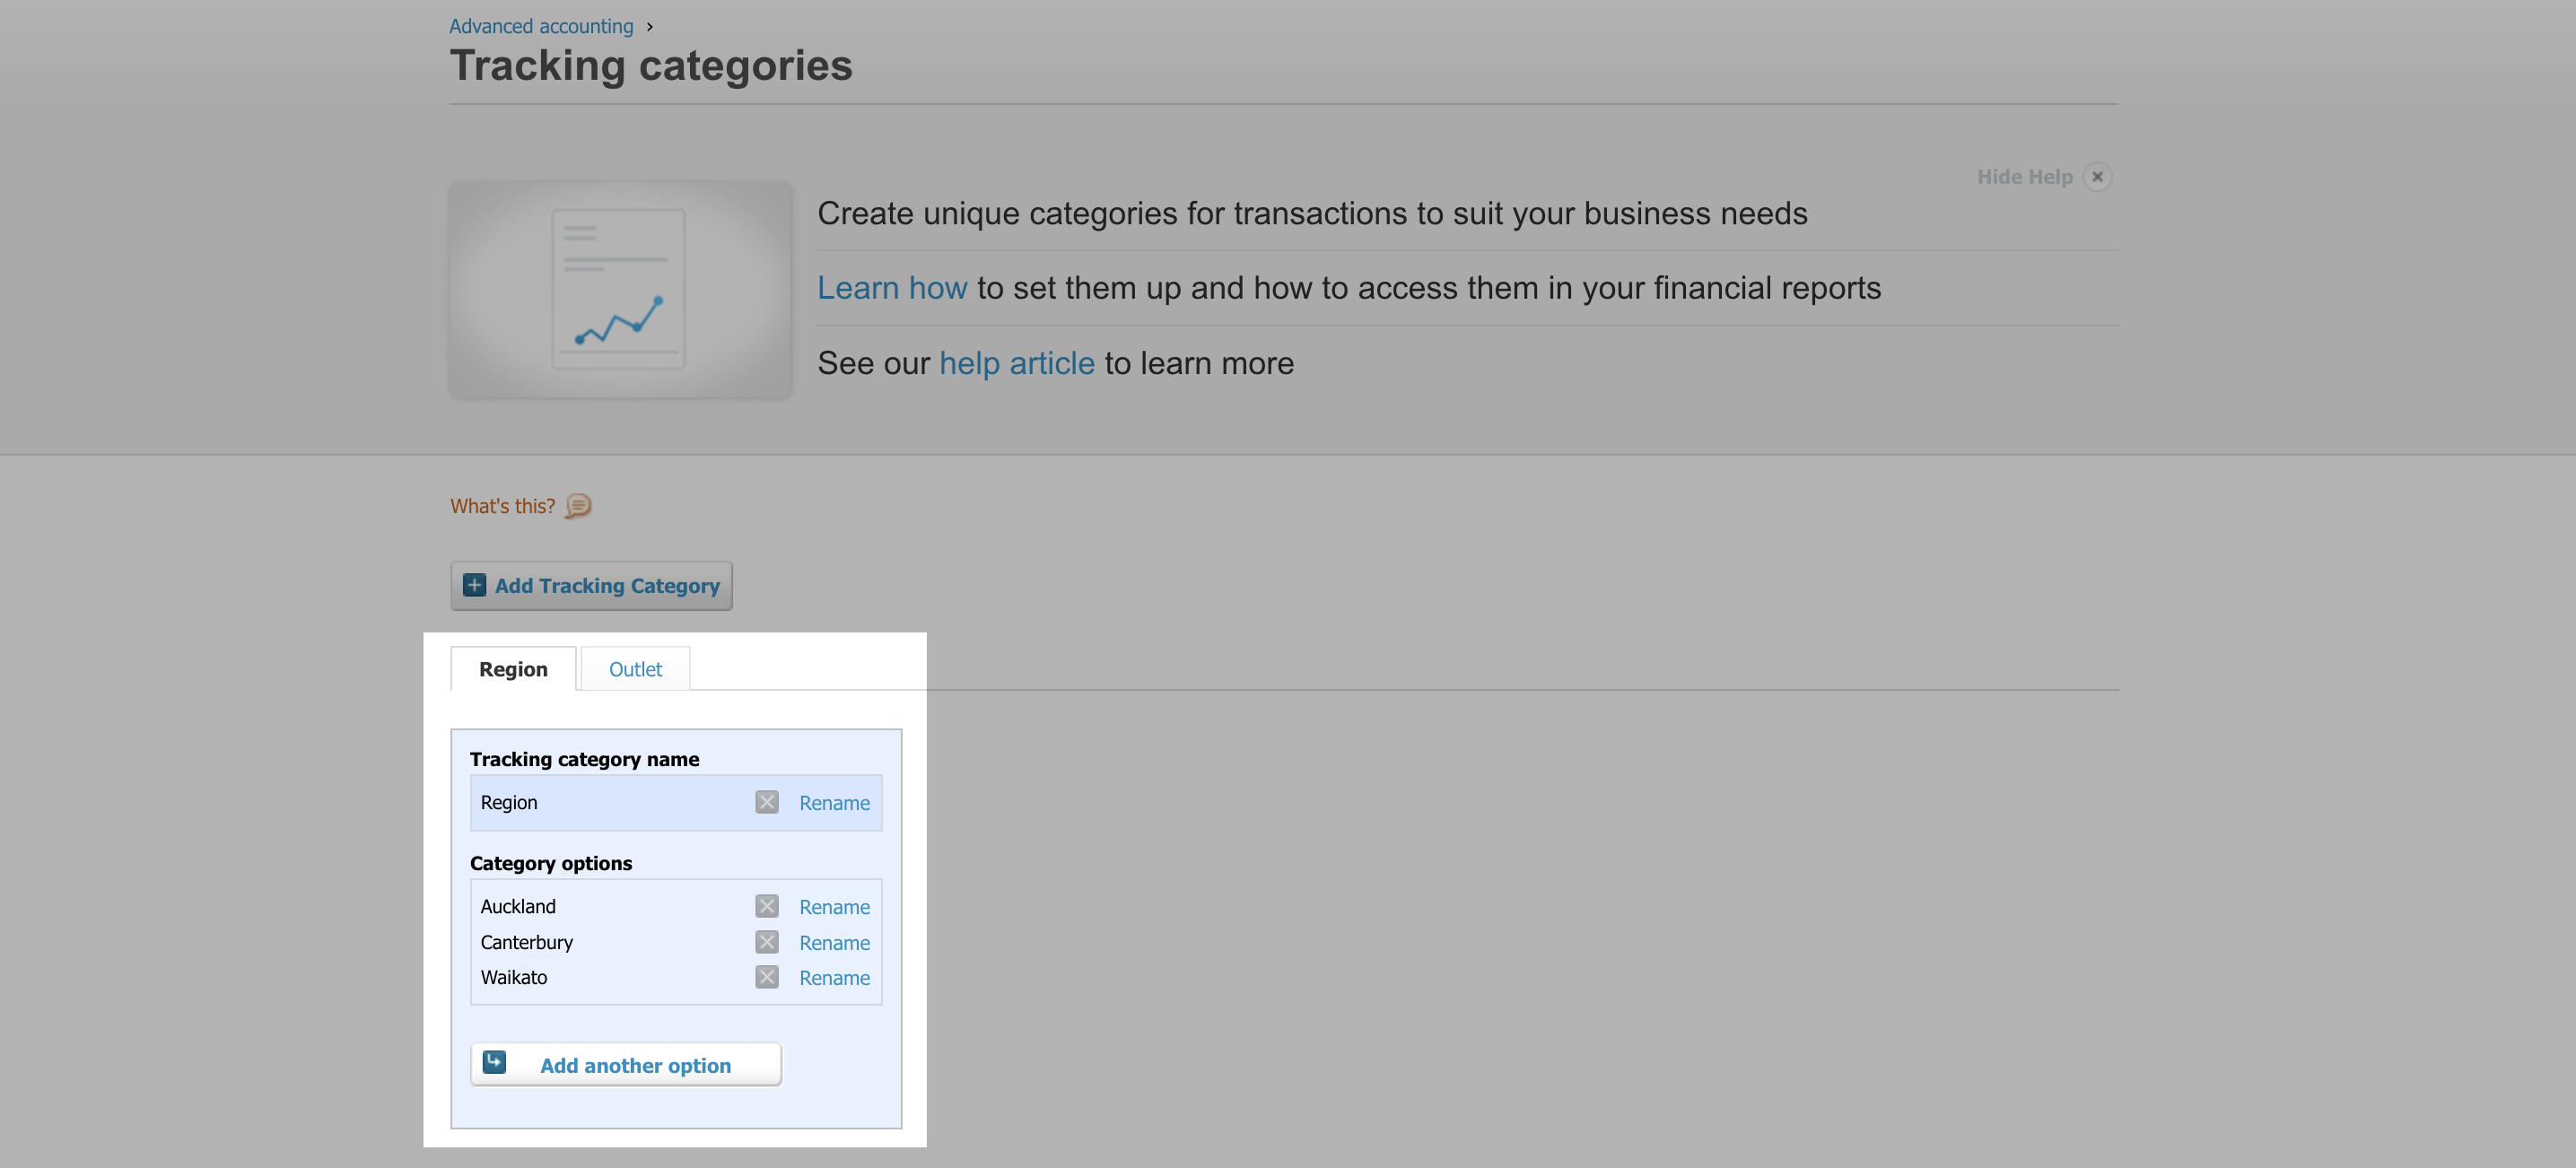 Tracking-Categories-Xero-Tracking-Category-Options.png